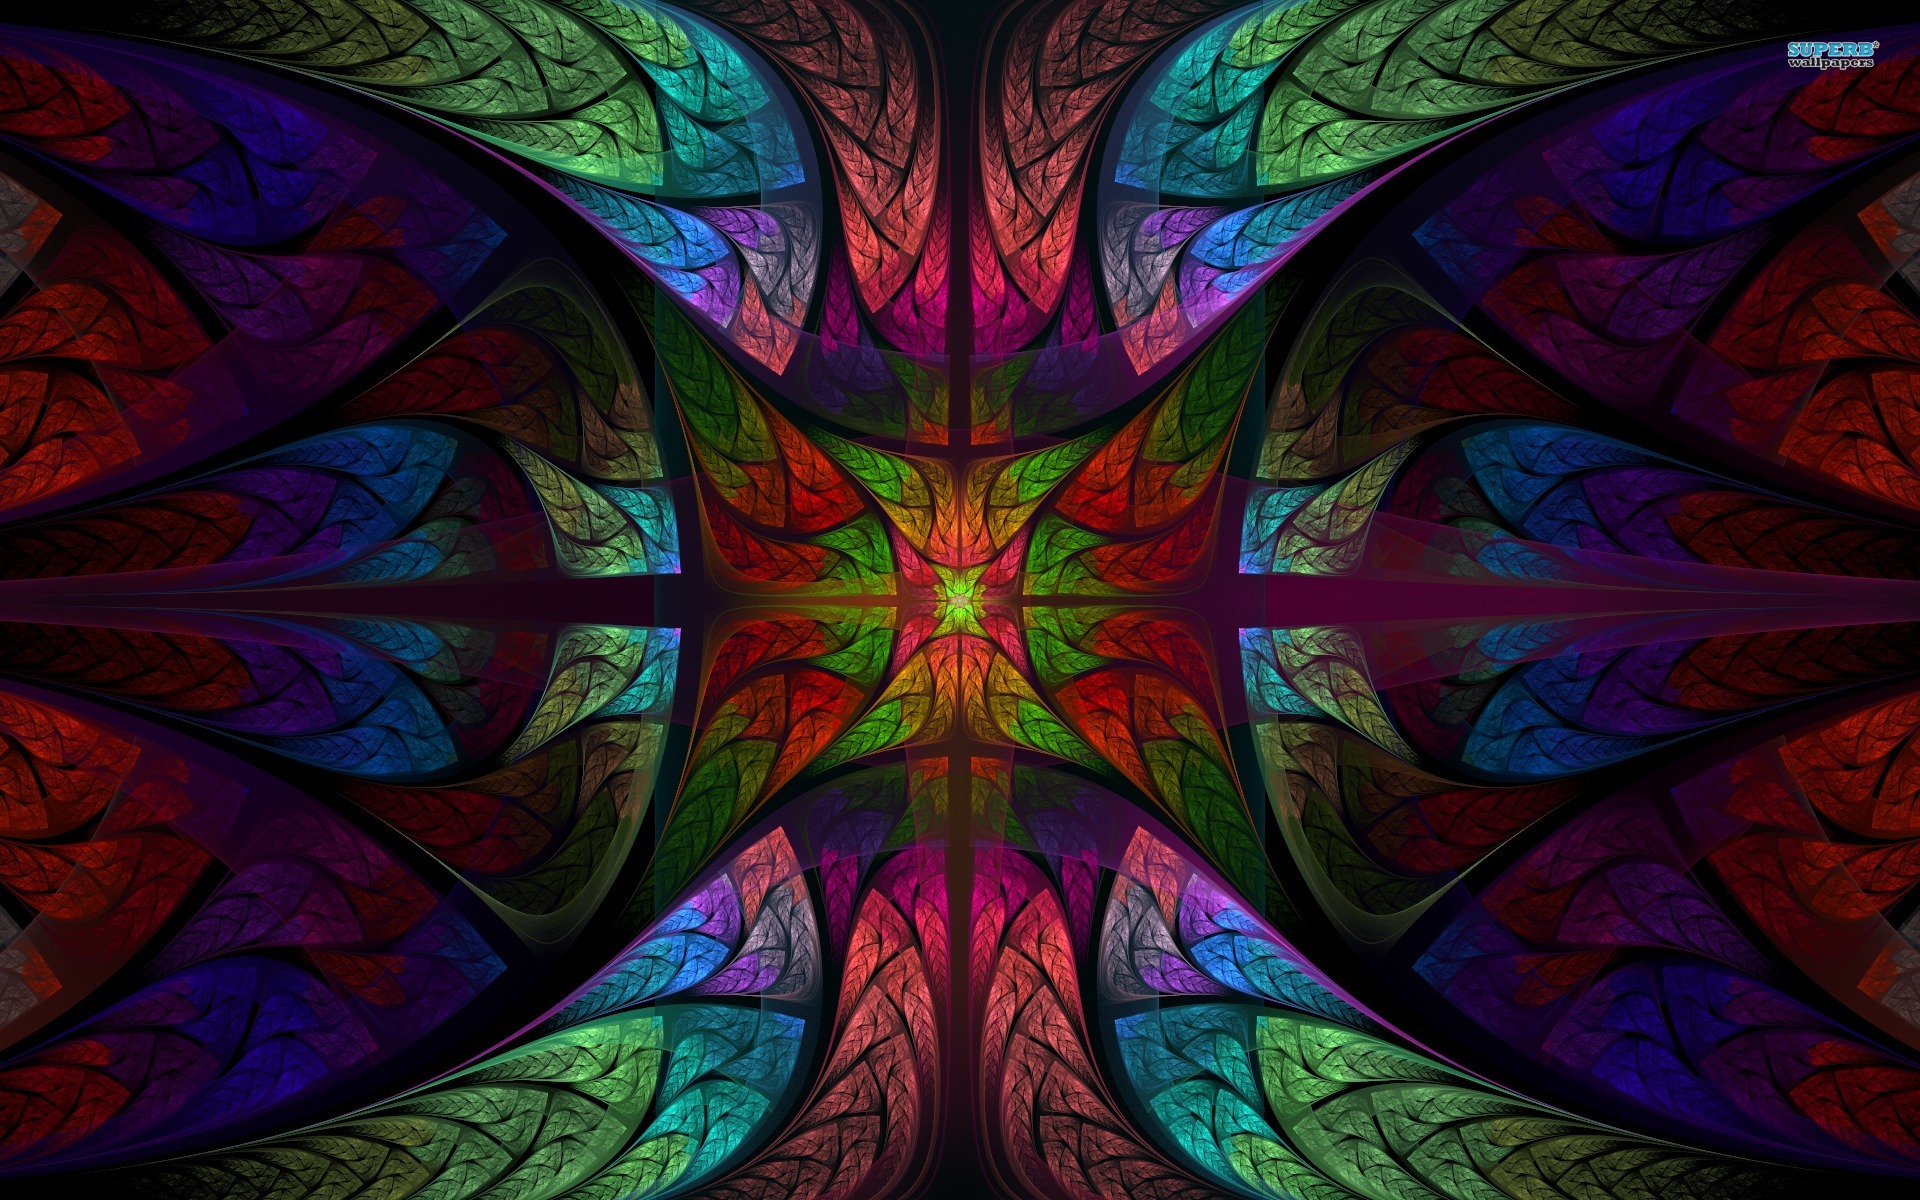 Stained glass wallpaper 9 33298 HD Wallpapers Glefia.com